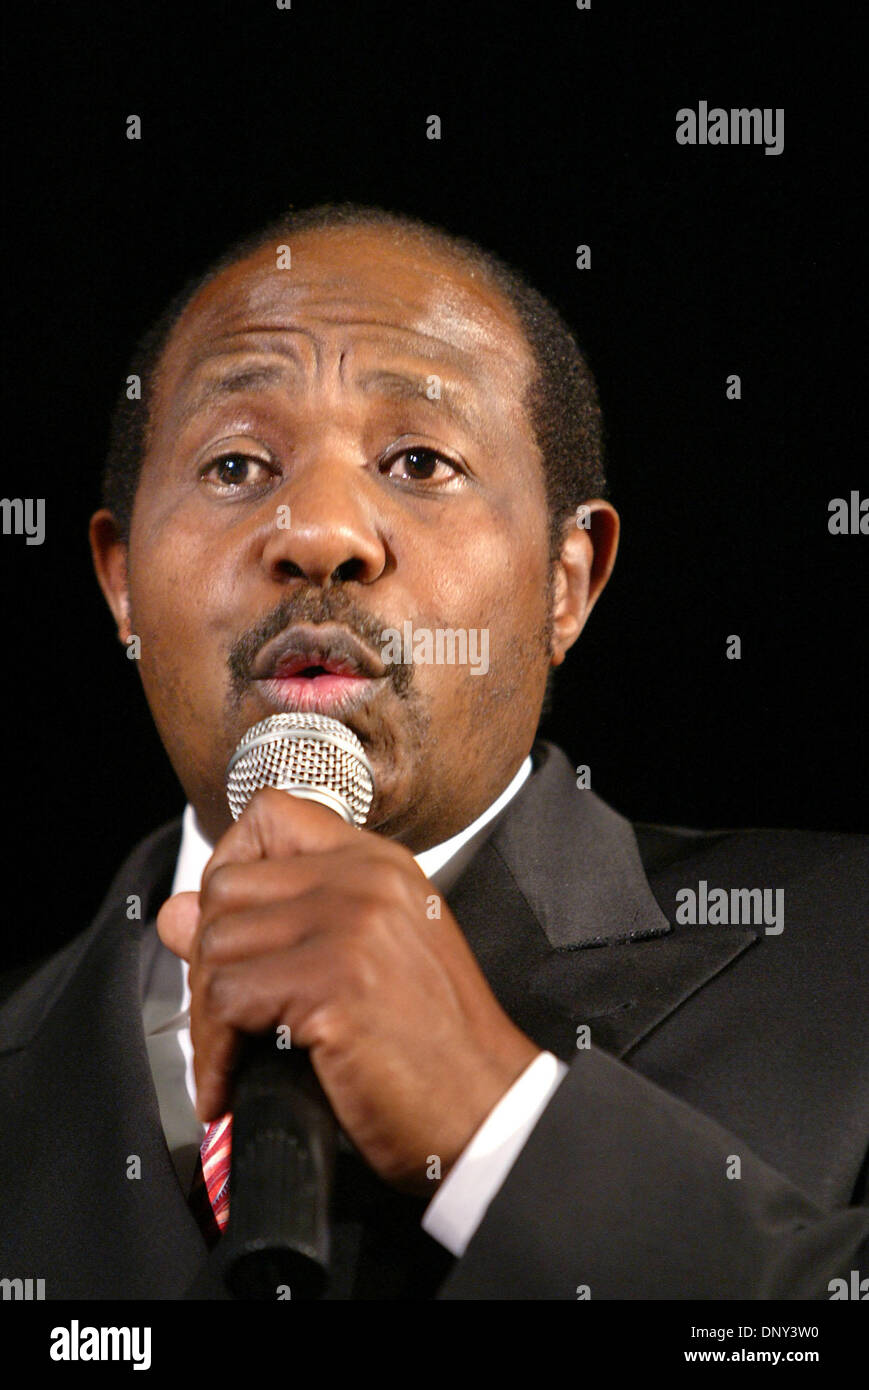 Jan 14, 2006; West Palm Beach, FL, USA; Hotel manager Paul Rusesabagina, whose story inspired the film Hotel Rwanda, speaks about his experiences in the 1994 civil war during his program at the  Jewish Community Center. Mandatory Credit: Photo by Greg Lovett/Palm Beach Post /ZUMA Press. (©) Copyright 2006 by Palm Beach Post Stock Photo